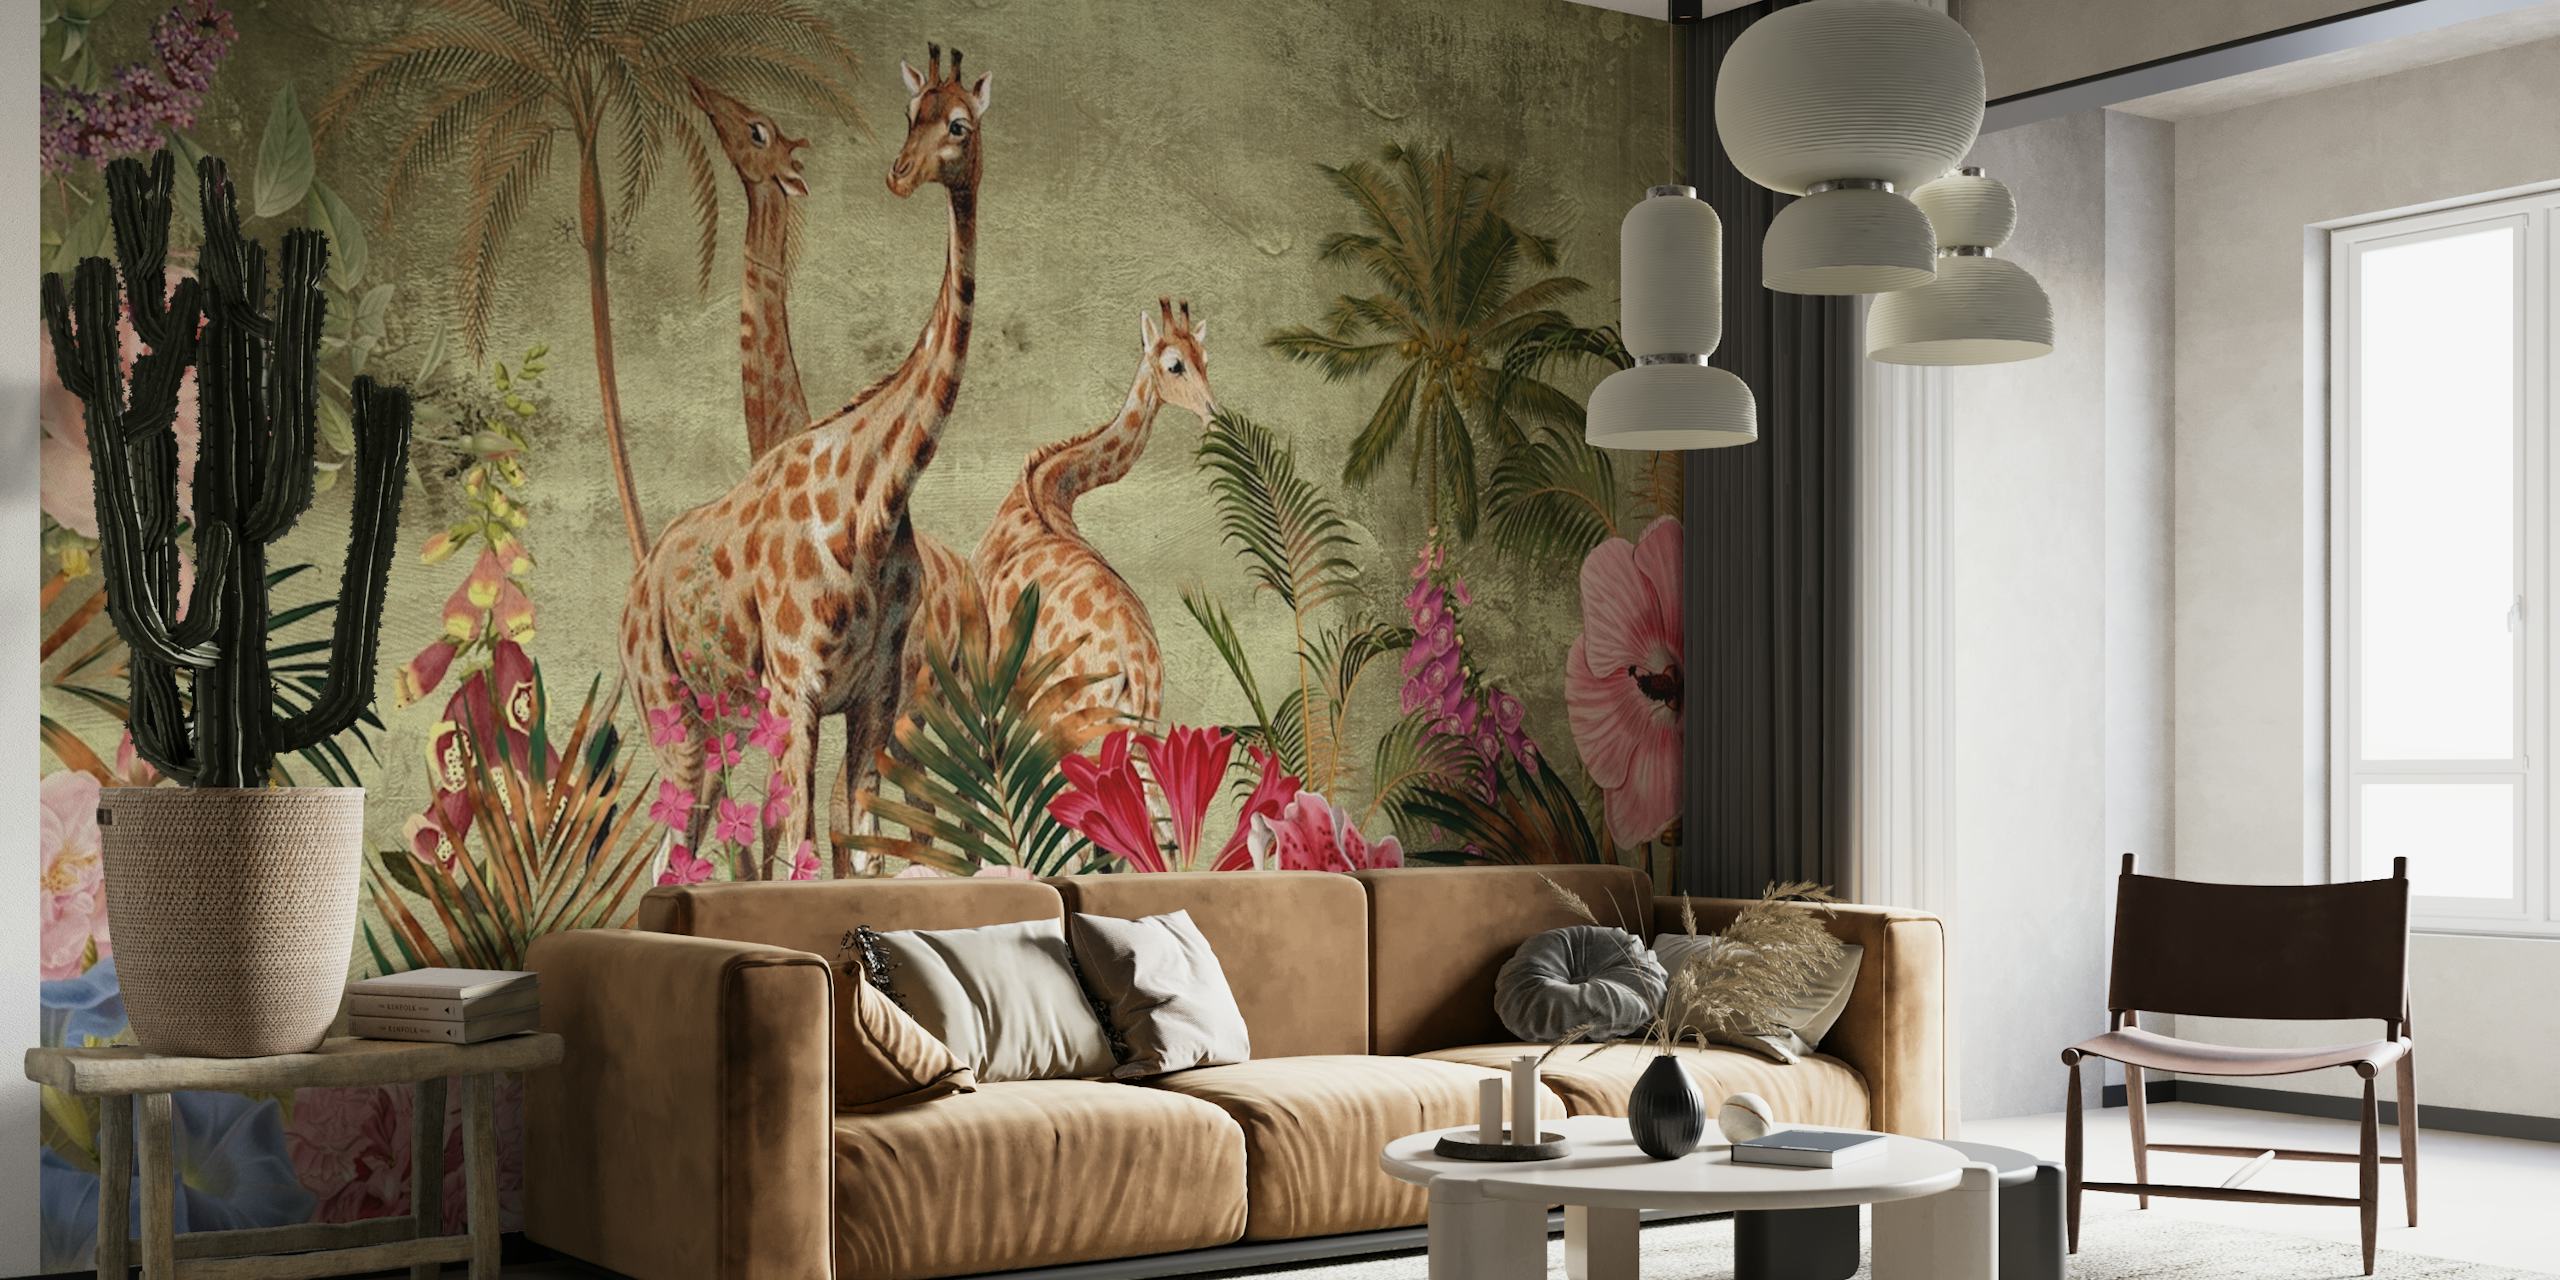 Tropical giraffe and floral design wall mural with vintage background